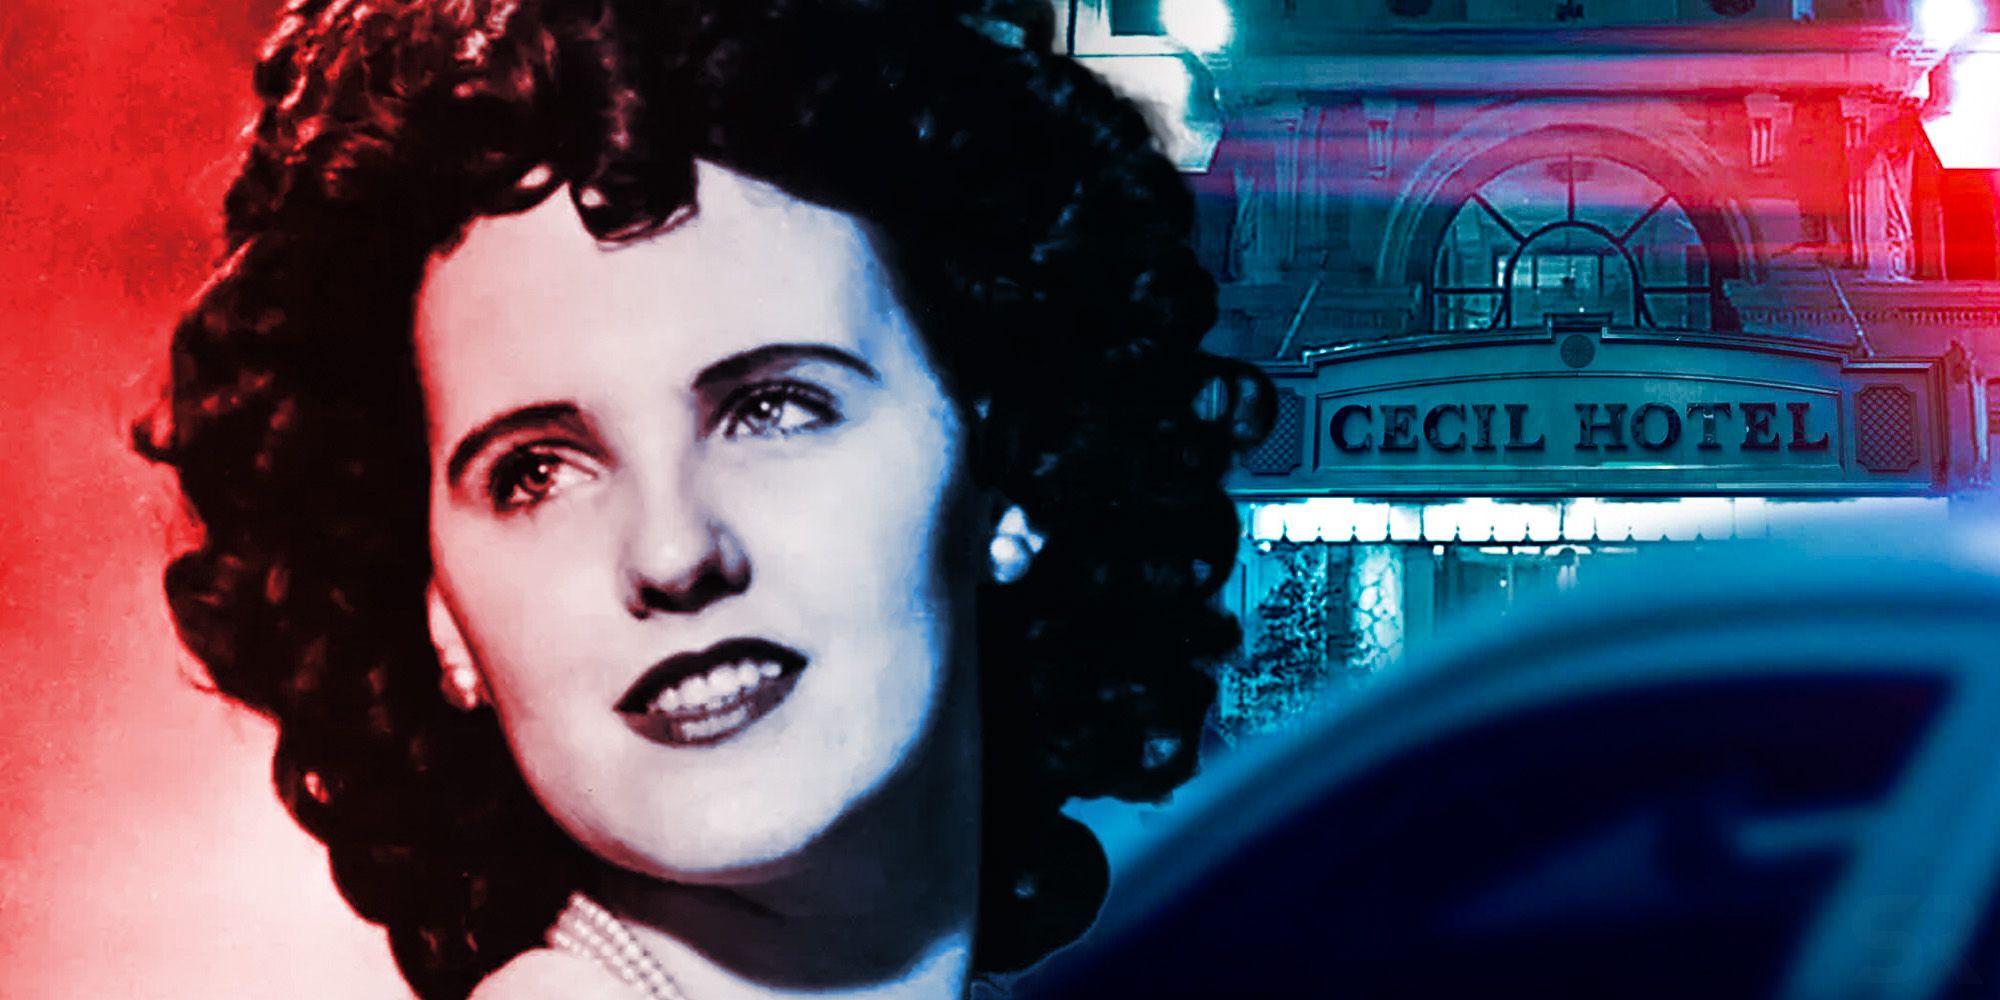 The Vanishing at the Cecil Hotel Black Dahlia Connection Explained